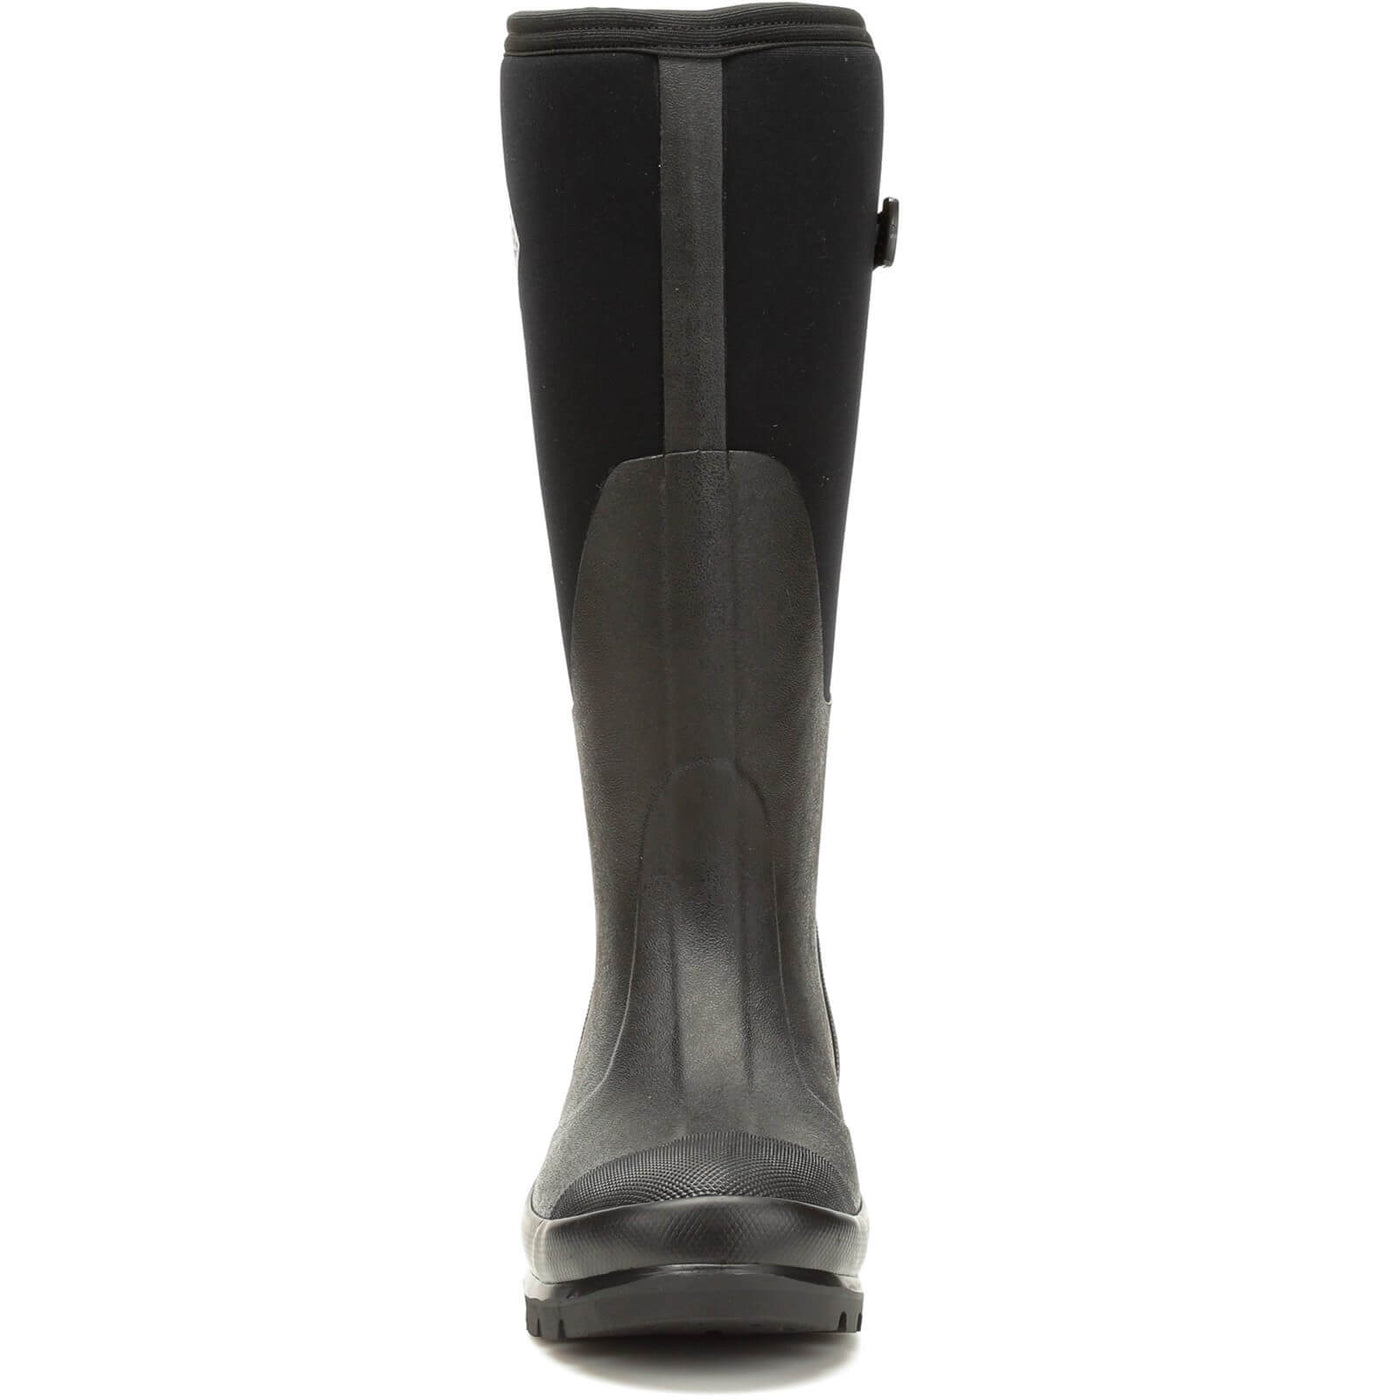 Muck Boots Chore Adjustable Slip On Tall Boots Black 3#colour_black